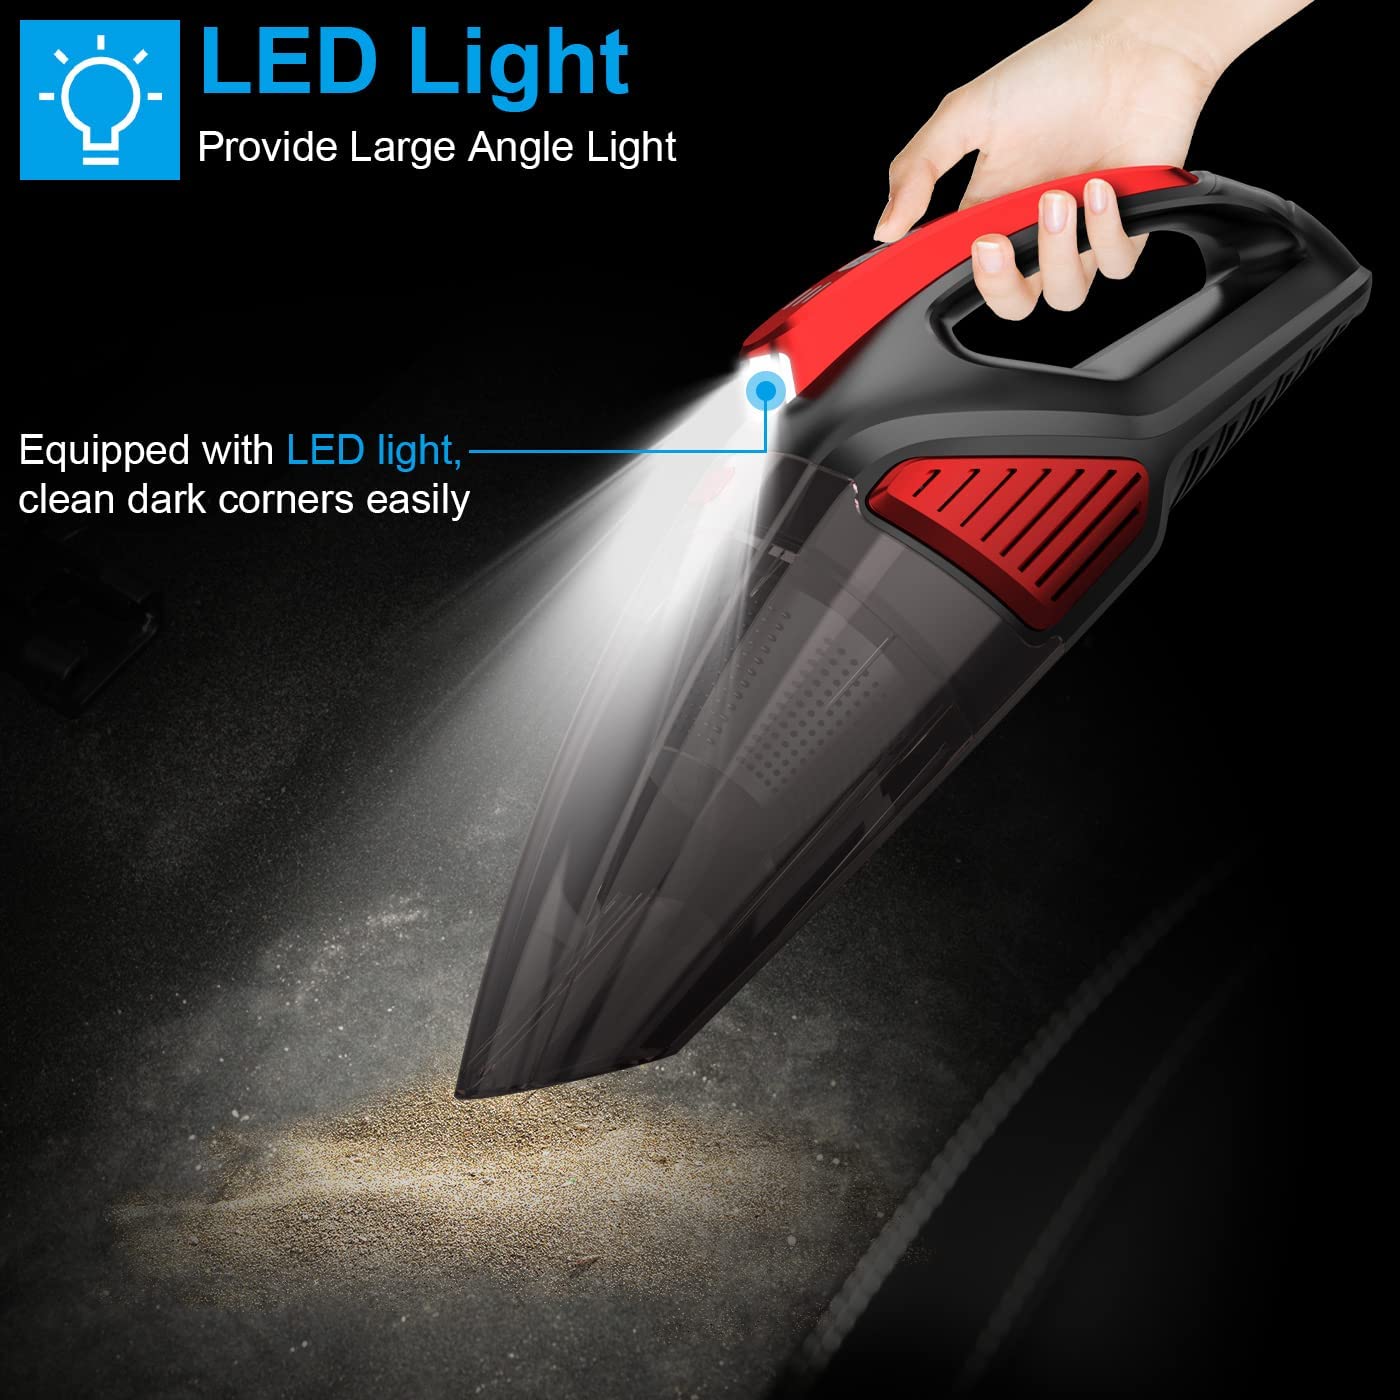 Two-Layer Filter Portable Car Vacuum Cleaner with LED Light 7500PA 12V 16.4FT Cable-Wet and Dry Use